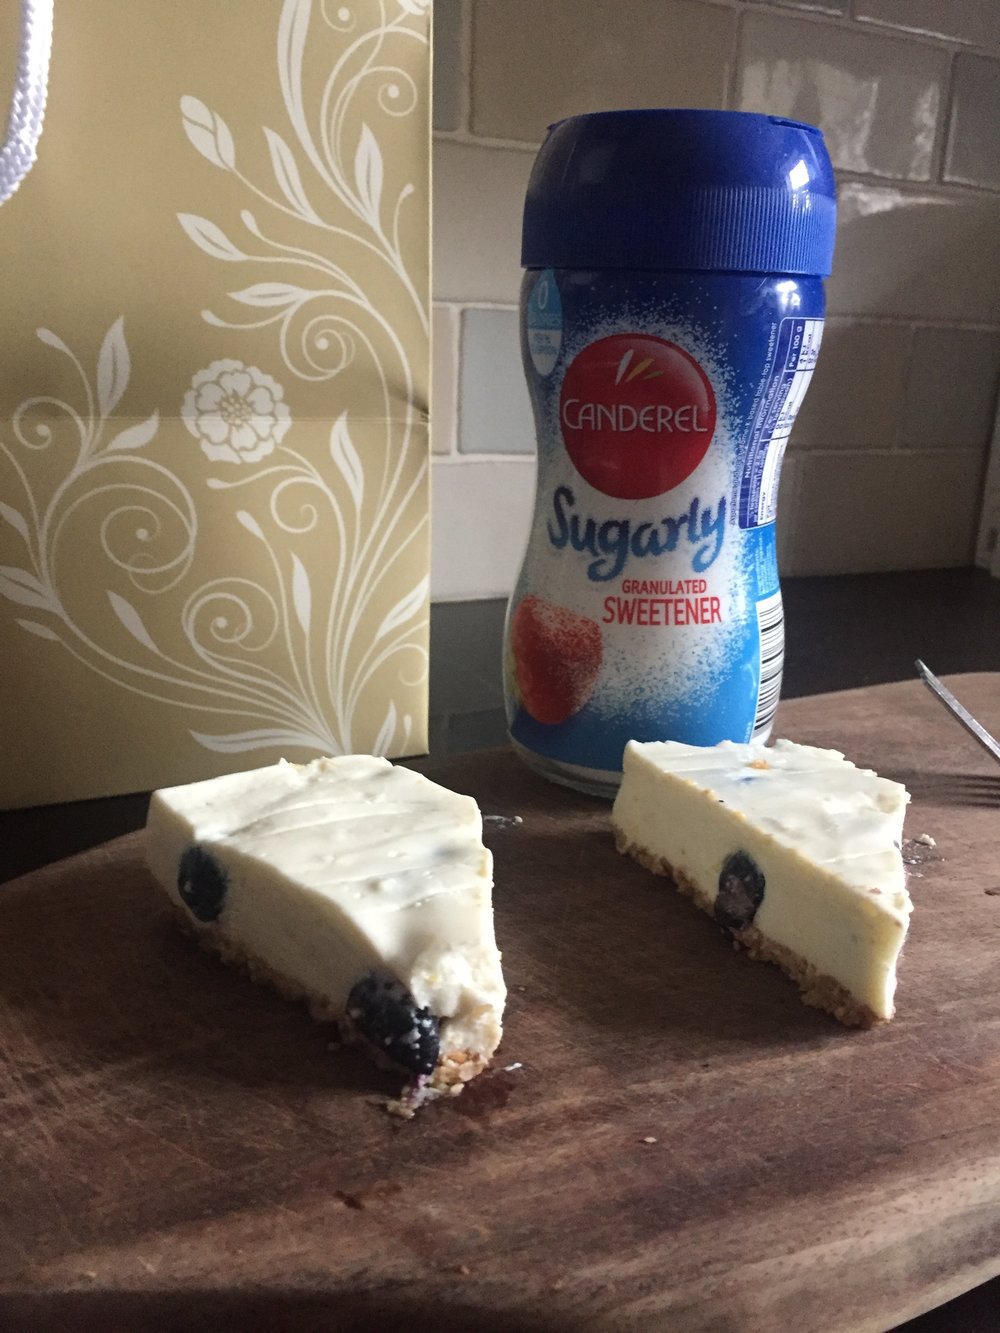 Lemon and Blueberry Cheesecake - Canderel Sugarly Taste Test